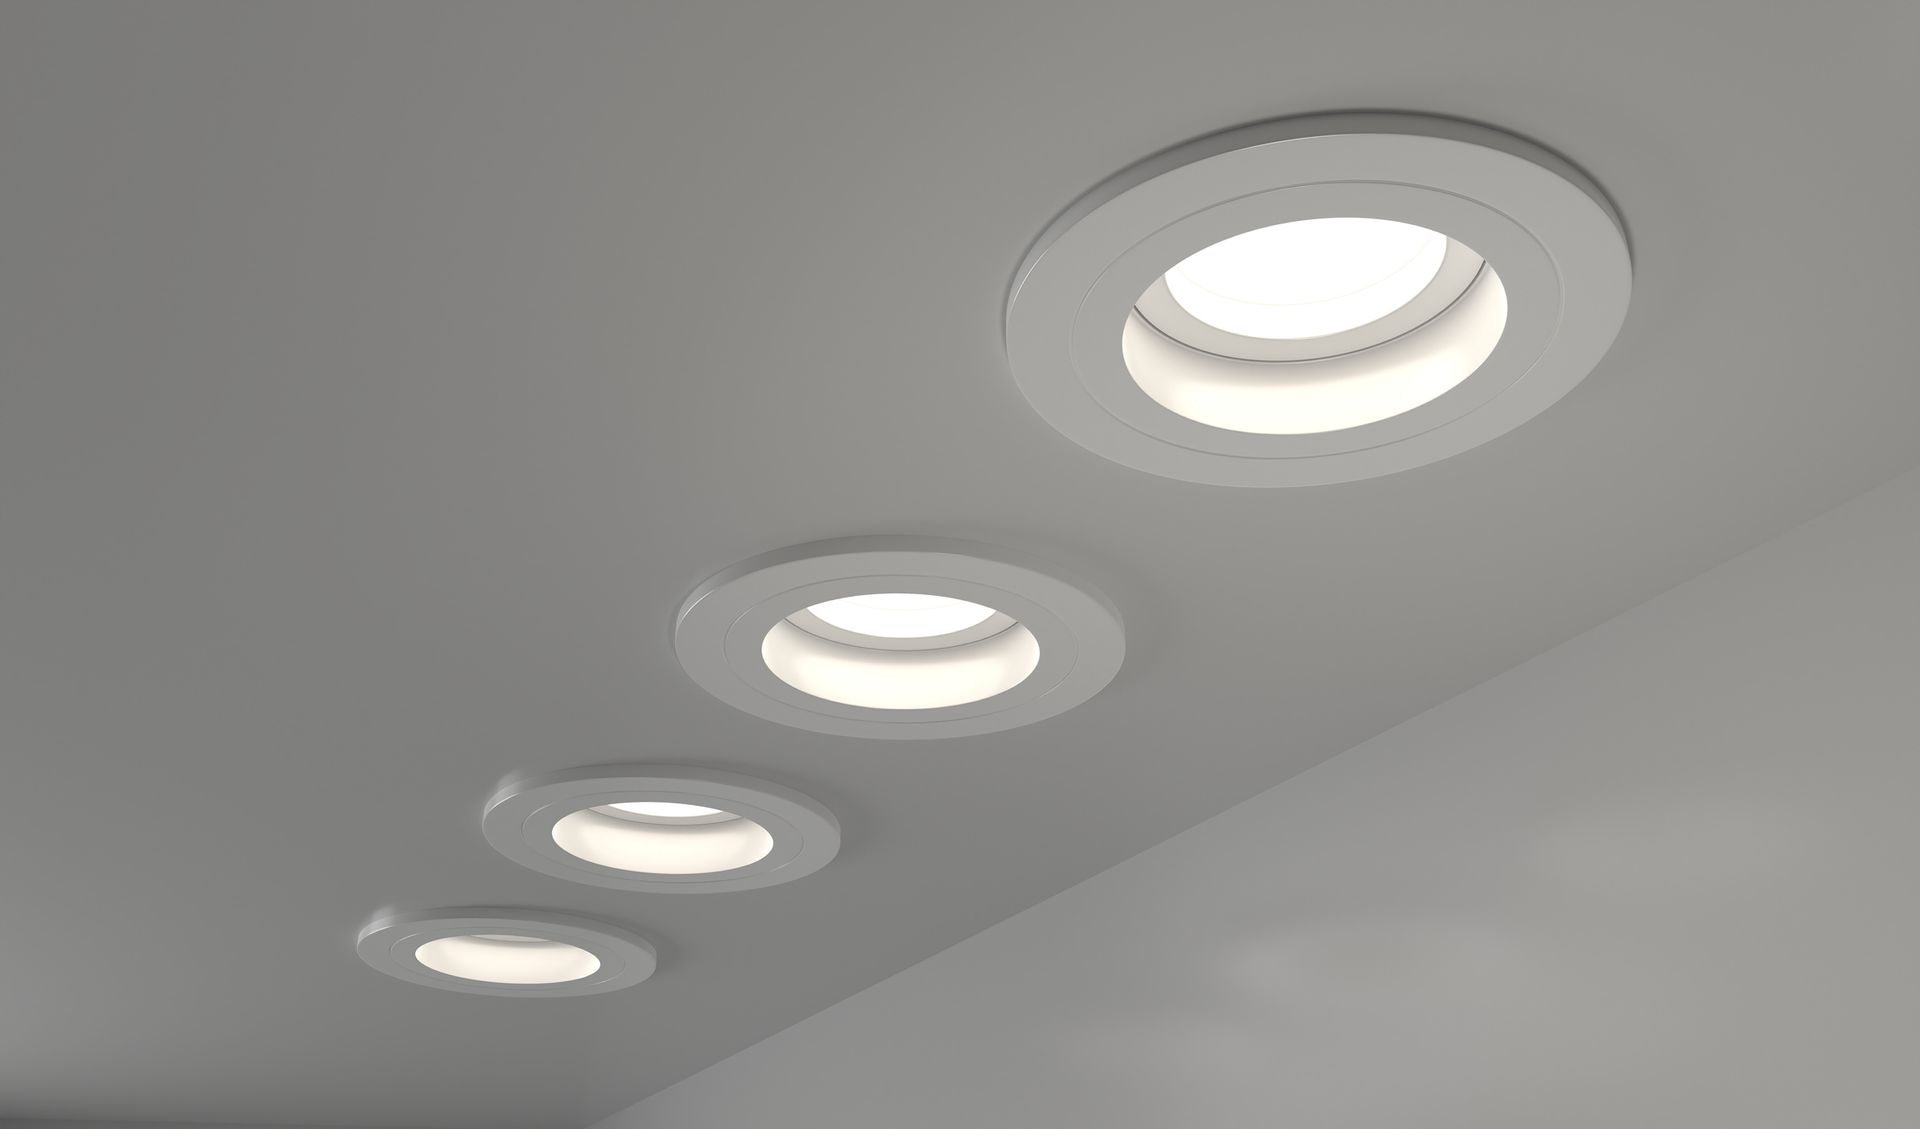 Spotlights recessed ceiling 3D render from Anderson Electric.